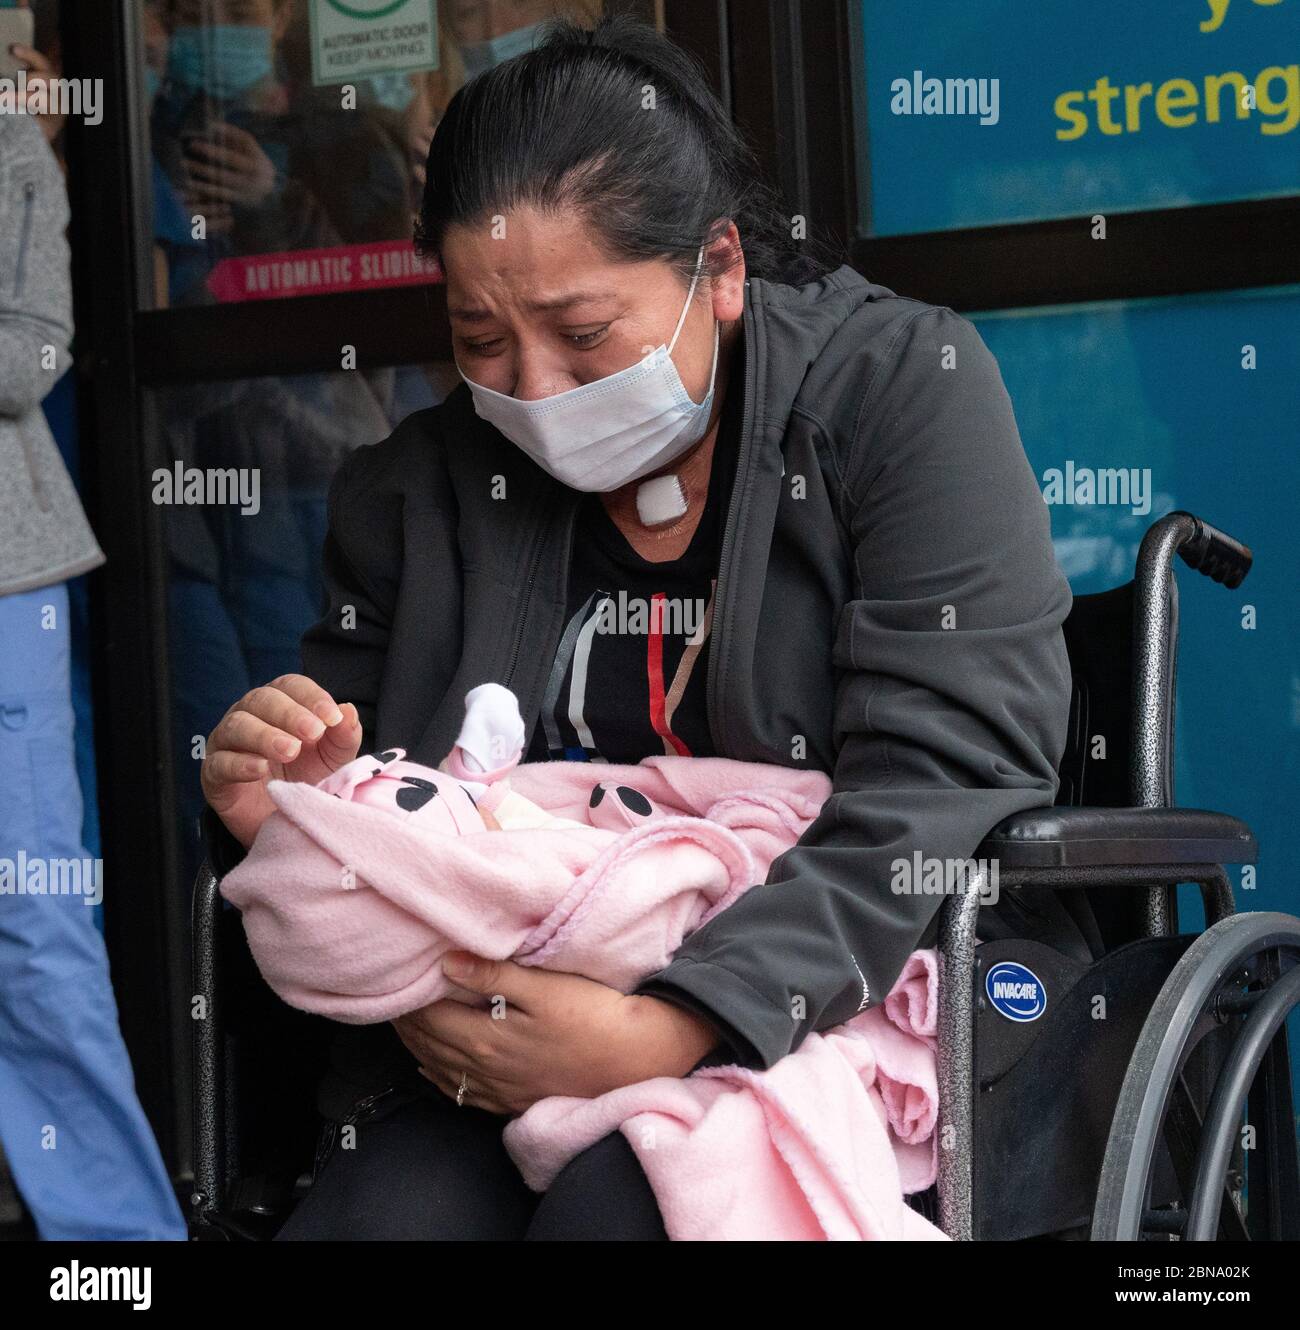 May 12, 2020, Cambridge, Massachusetts USA: Isabel Gonzalez seeing her baby Victoria for the first time, when she is discharged from COVID-19 Recovery Unit Spaulding Hospital in Cambridge. Gonzalez, 34-year old from Chelsea, MA who was pregnant when she contracted COVID-19, delivered her baby Victoria via emergency C-section at Massachustts General Hospital on March 30, when she was initially admitted. She was transferred to the ICU on April 2nd, intubated and was on a ventilator until April 26th. She was admitted to Spaulding Hospital Cambridge on May 4th and now has tested COVID negative a Stock Photo